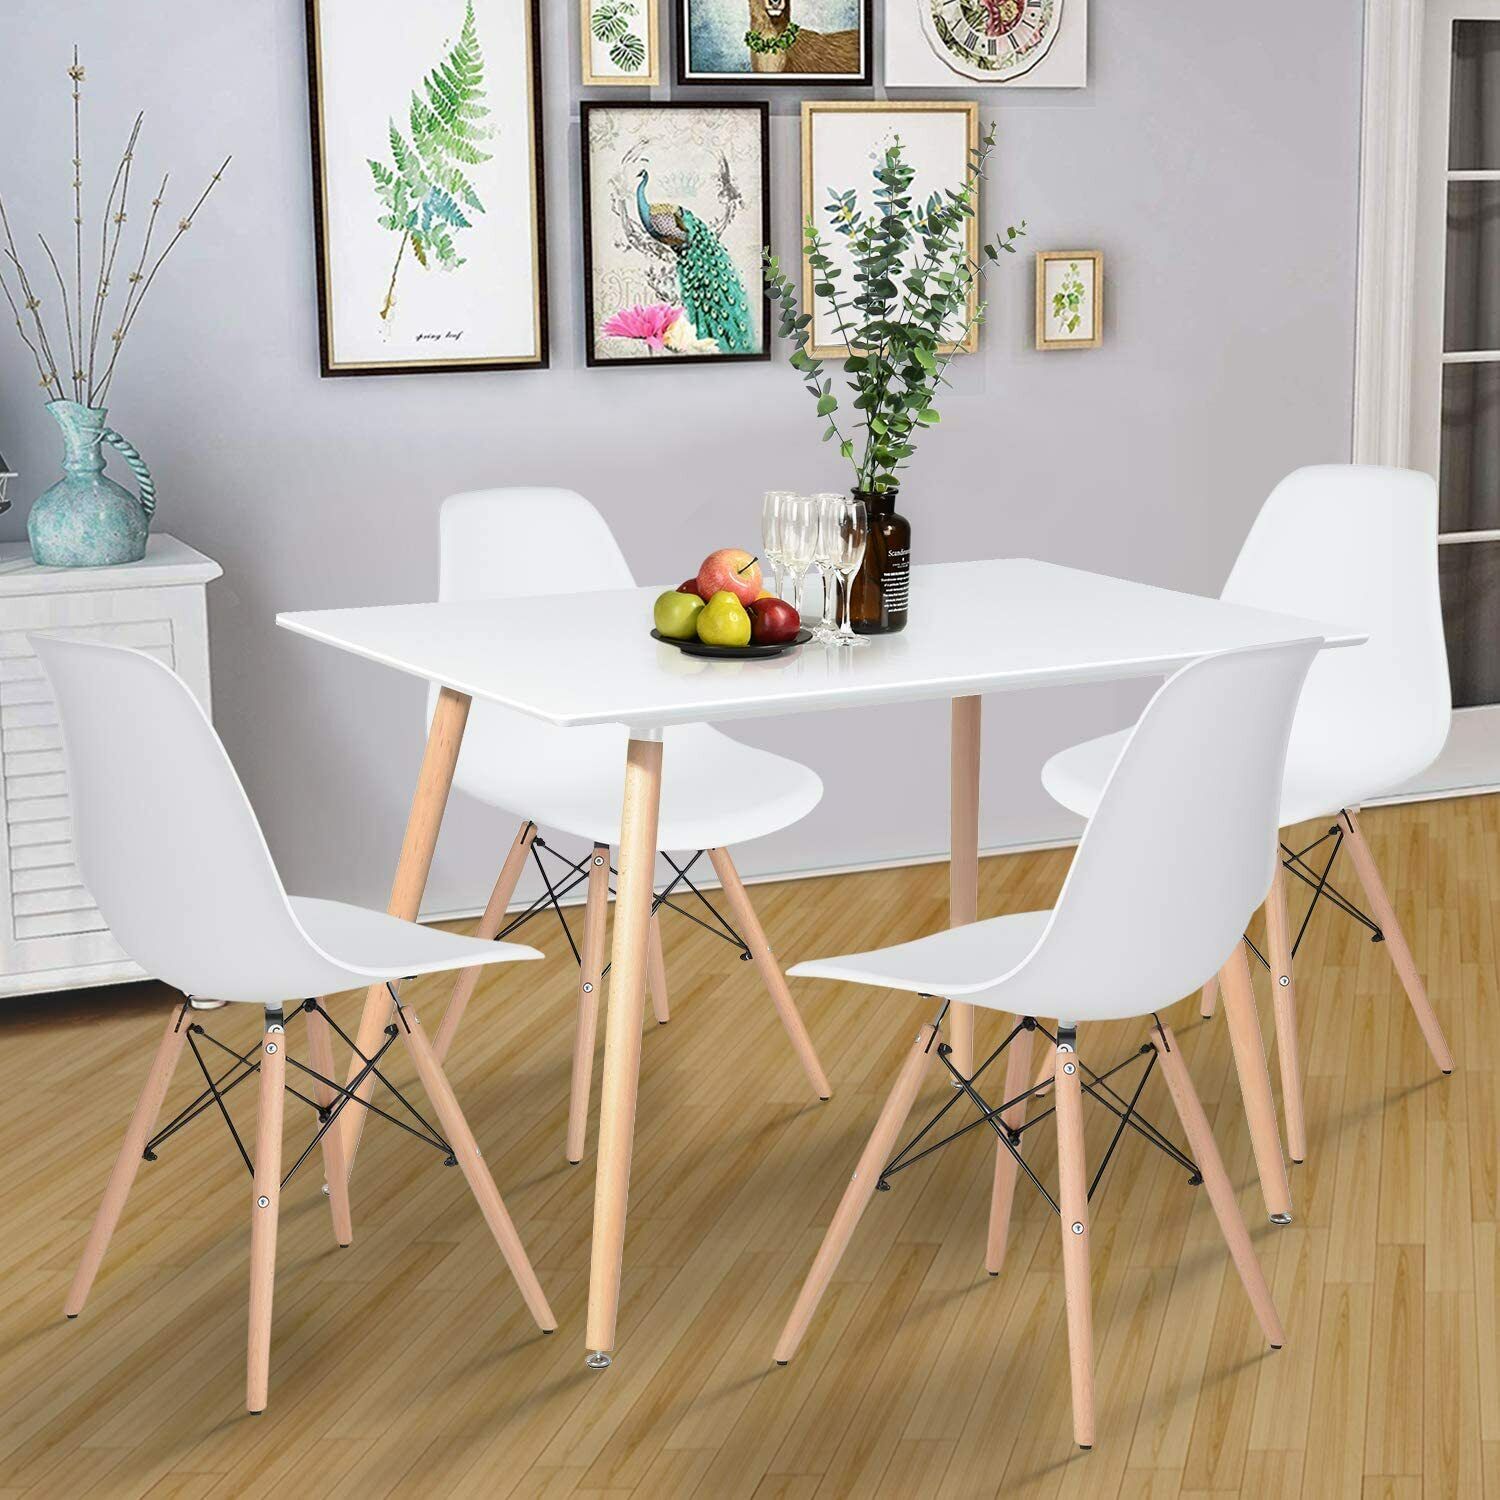 Set of 4 Dining Chair Plastic Chair for Kitchen Dining Bedroom Living Room White Fetines Does Not Apply - фотография #6